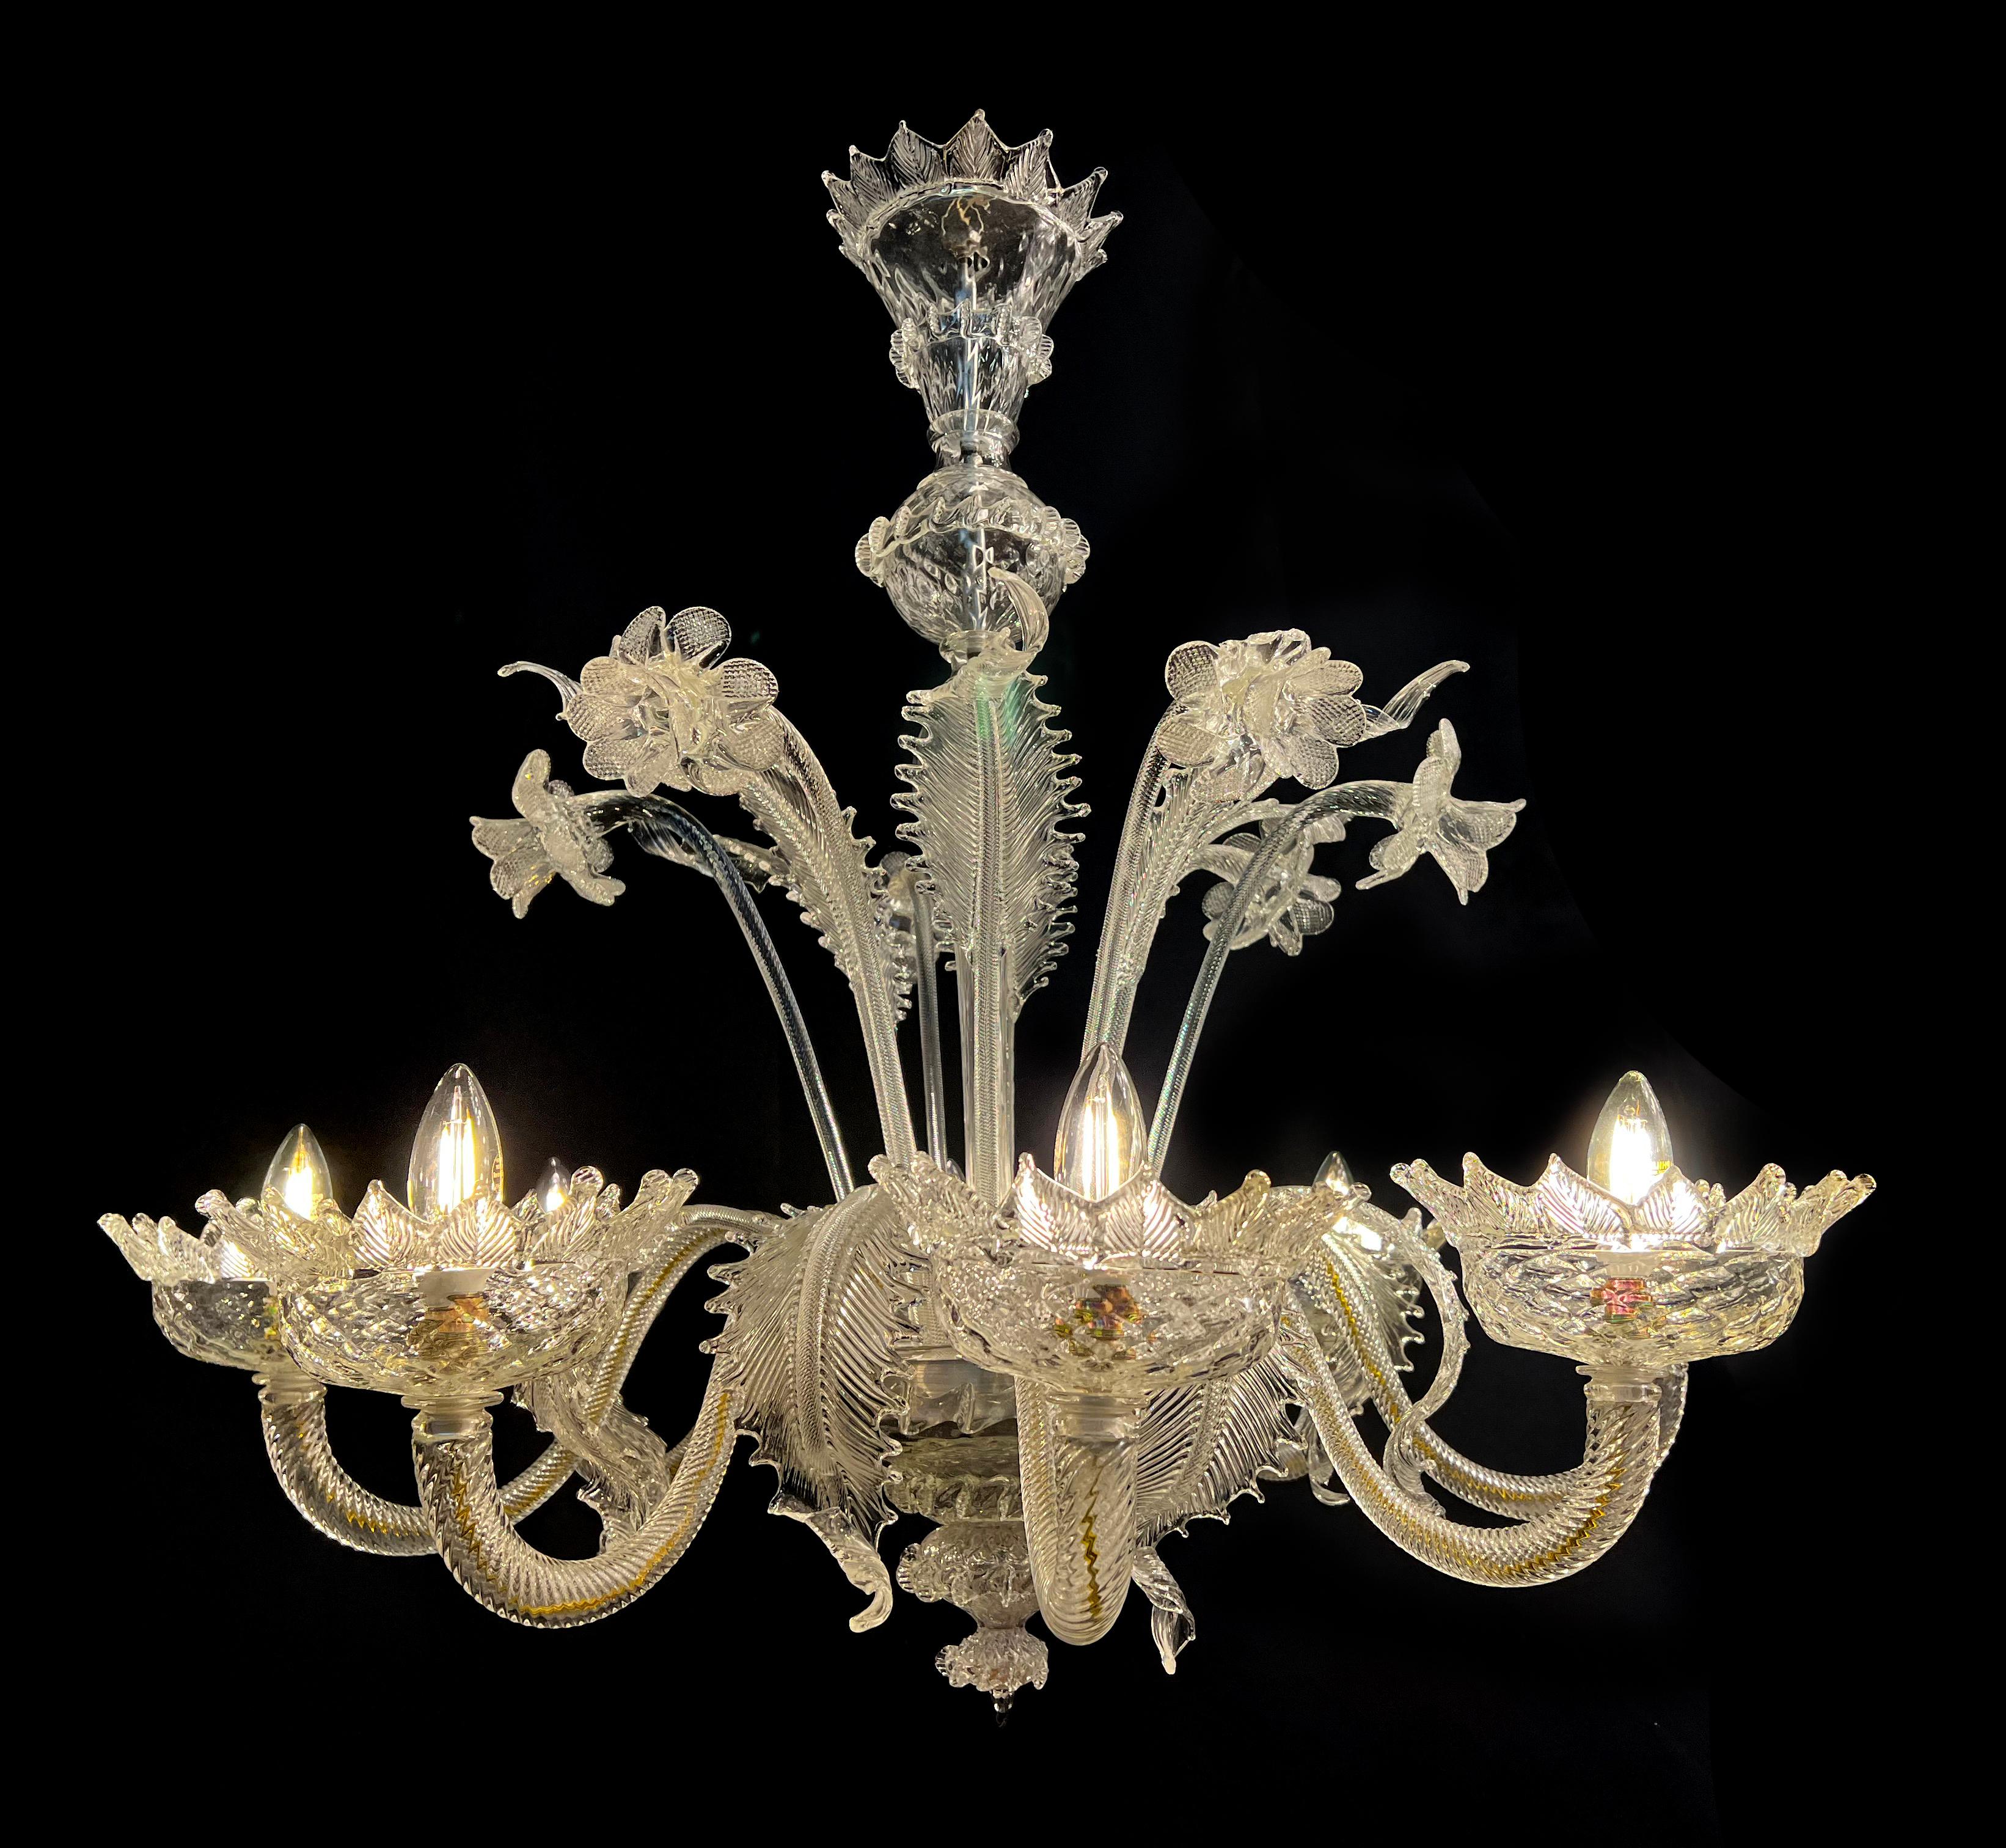 Made by a Murano artisan on the occasion of the coronation of Queen Elizabeth II. 8 cups in the shape of a crown lend majesty to the brilliance of the glass. 
8 lights e14
6 flowers
14 leaves